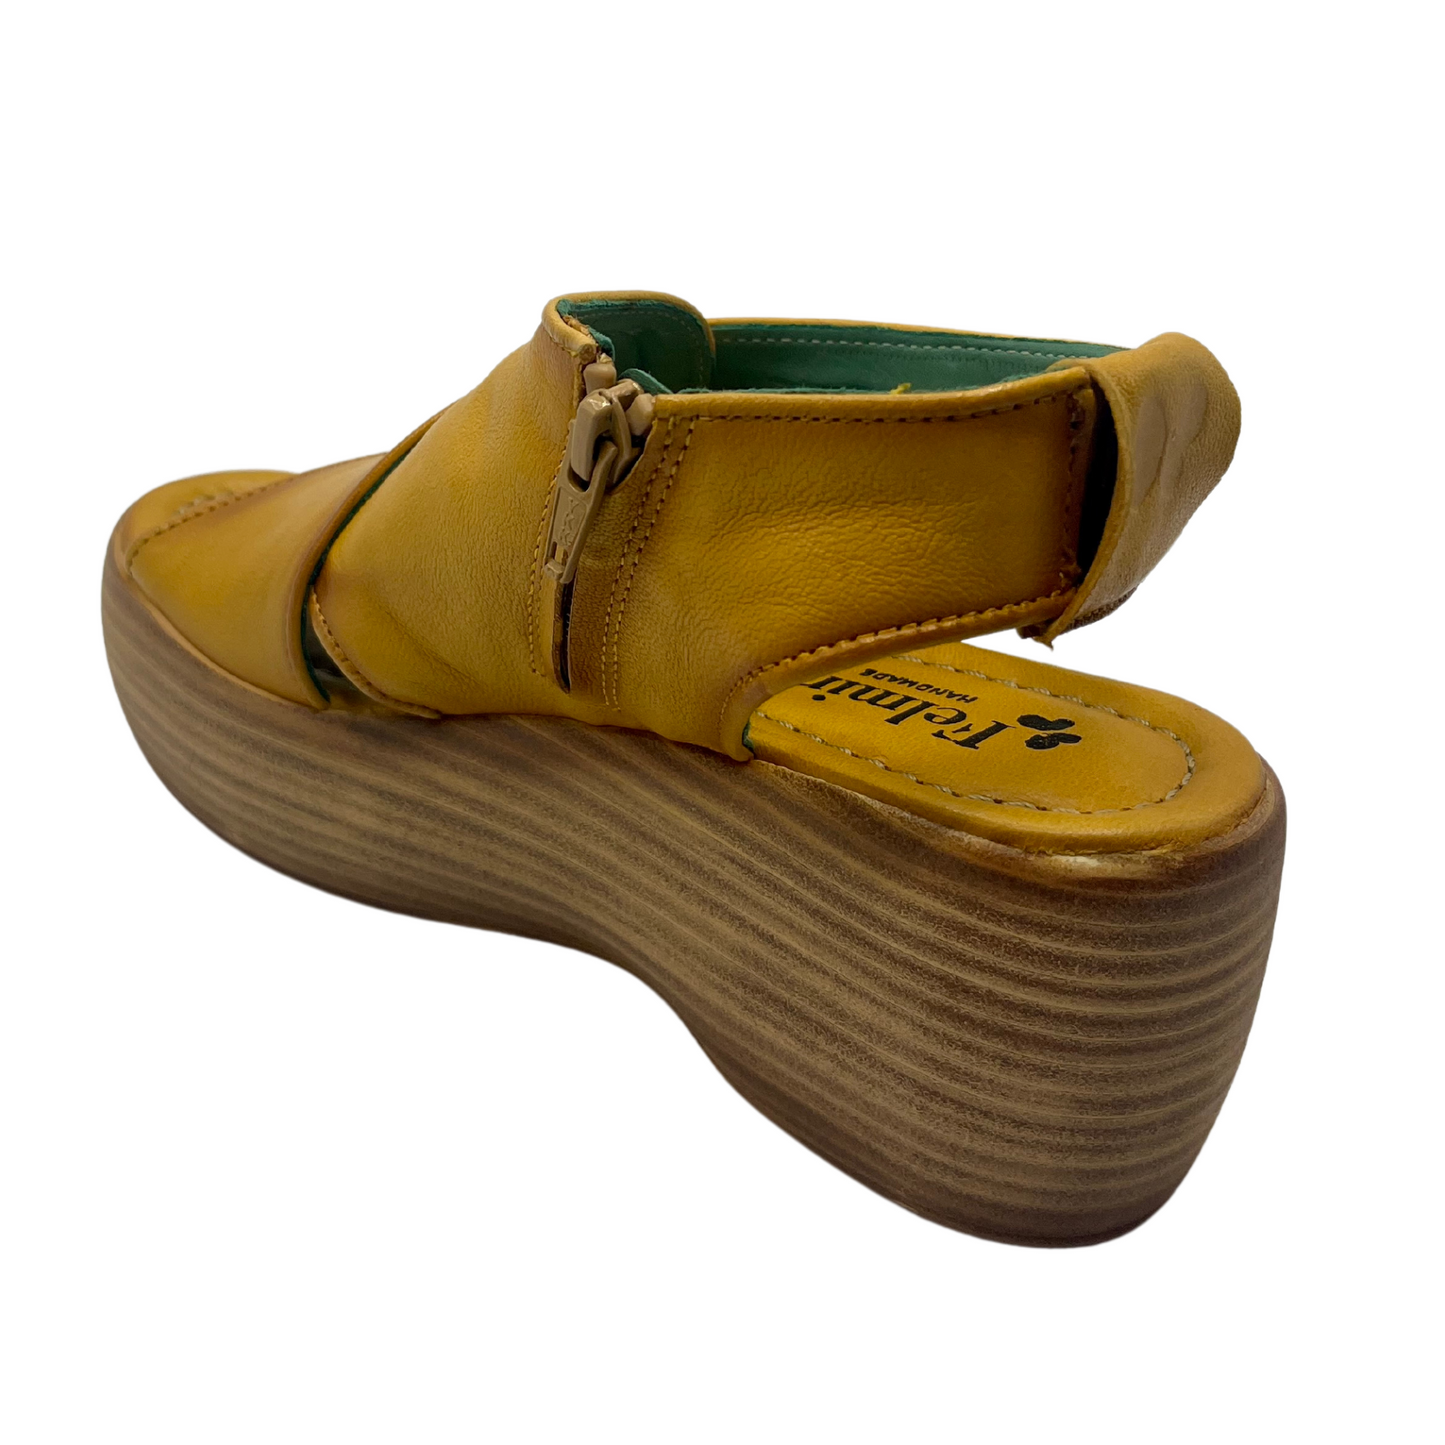 Back view of mustard coloured leather sandals with chunky wedge sole and sling back strap